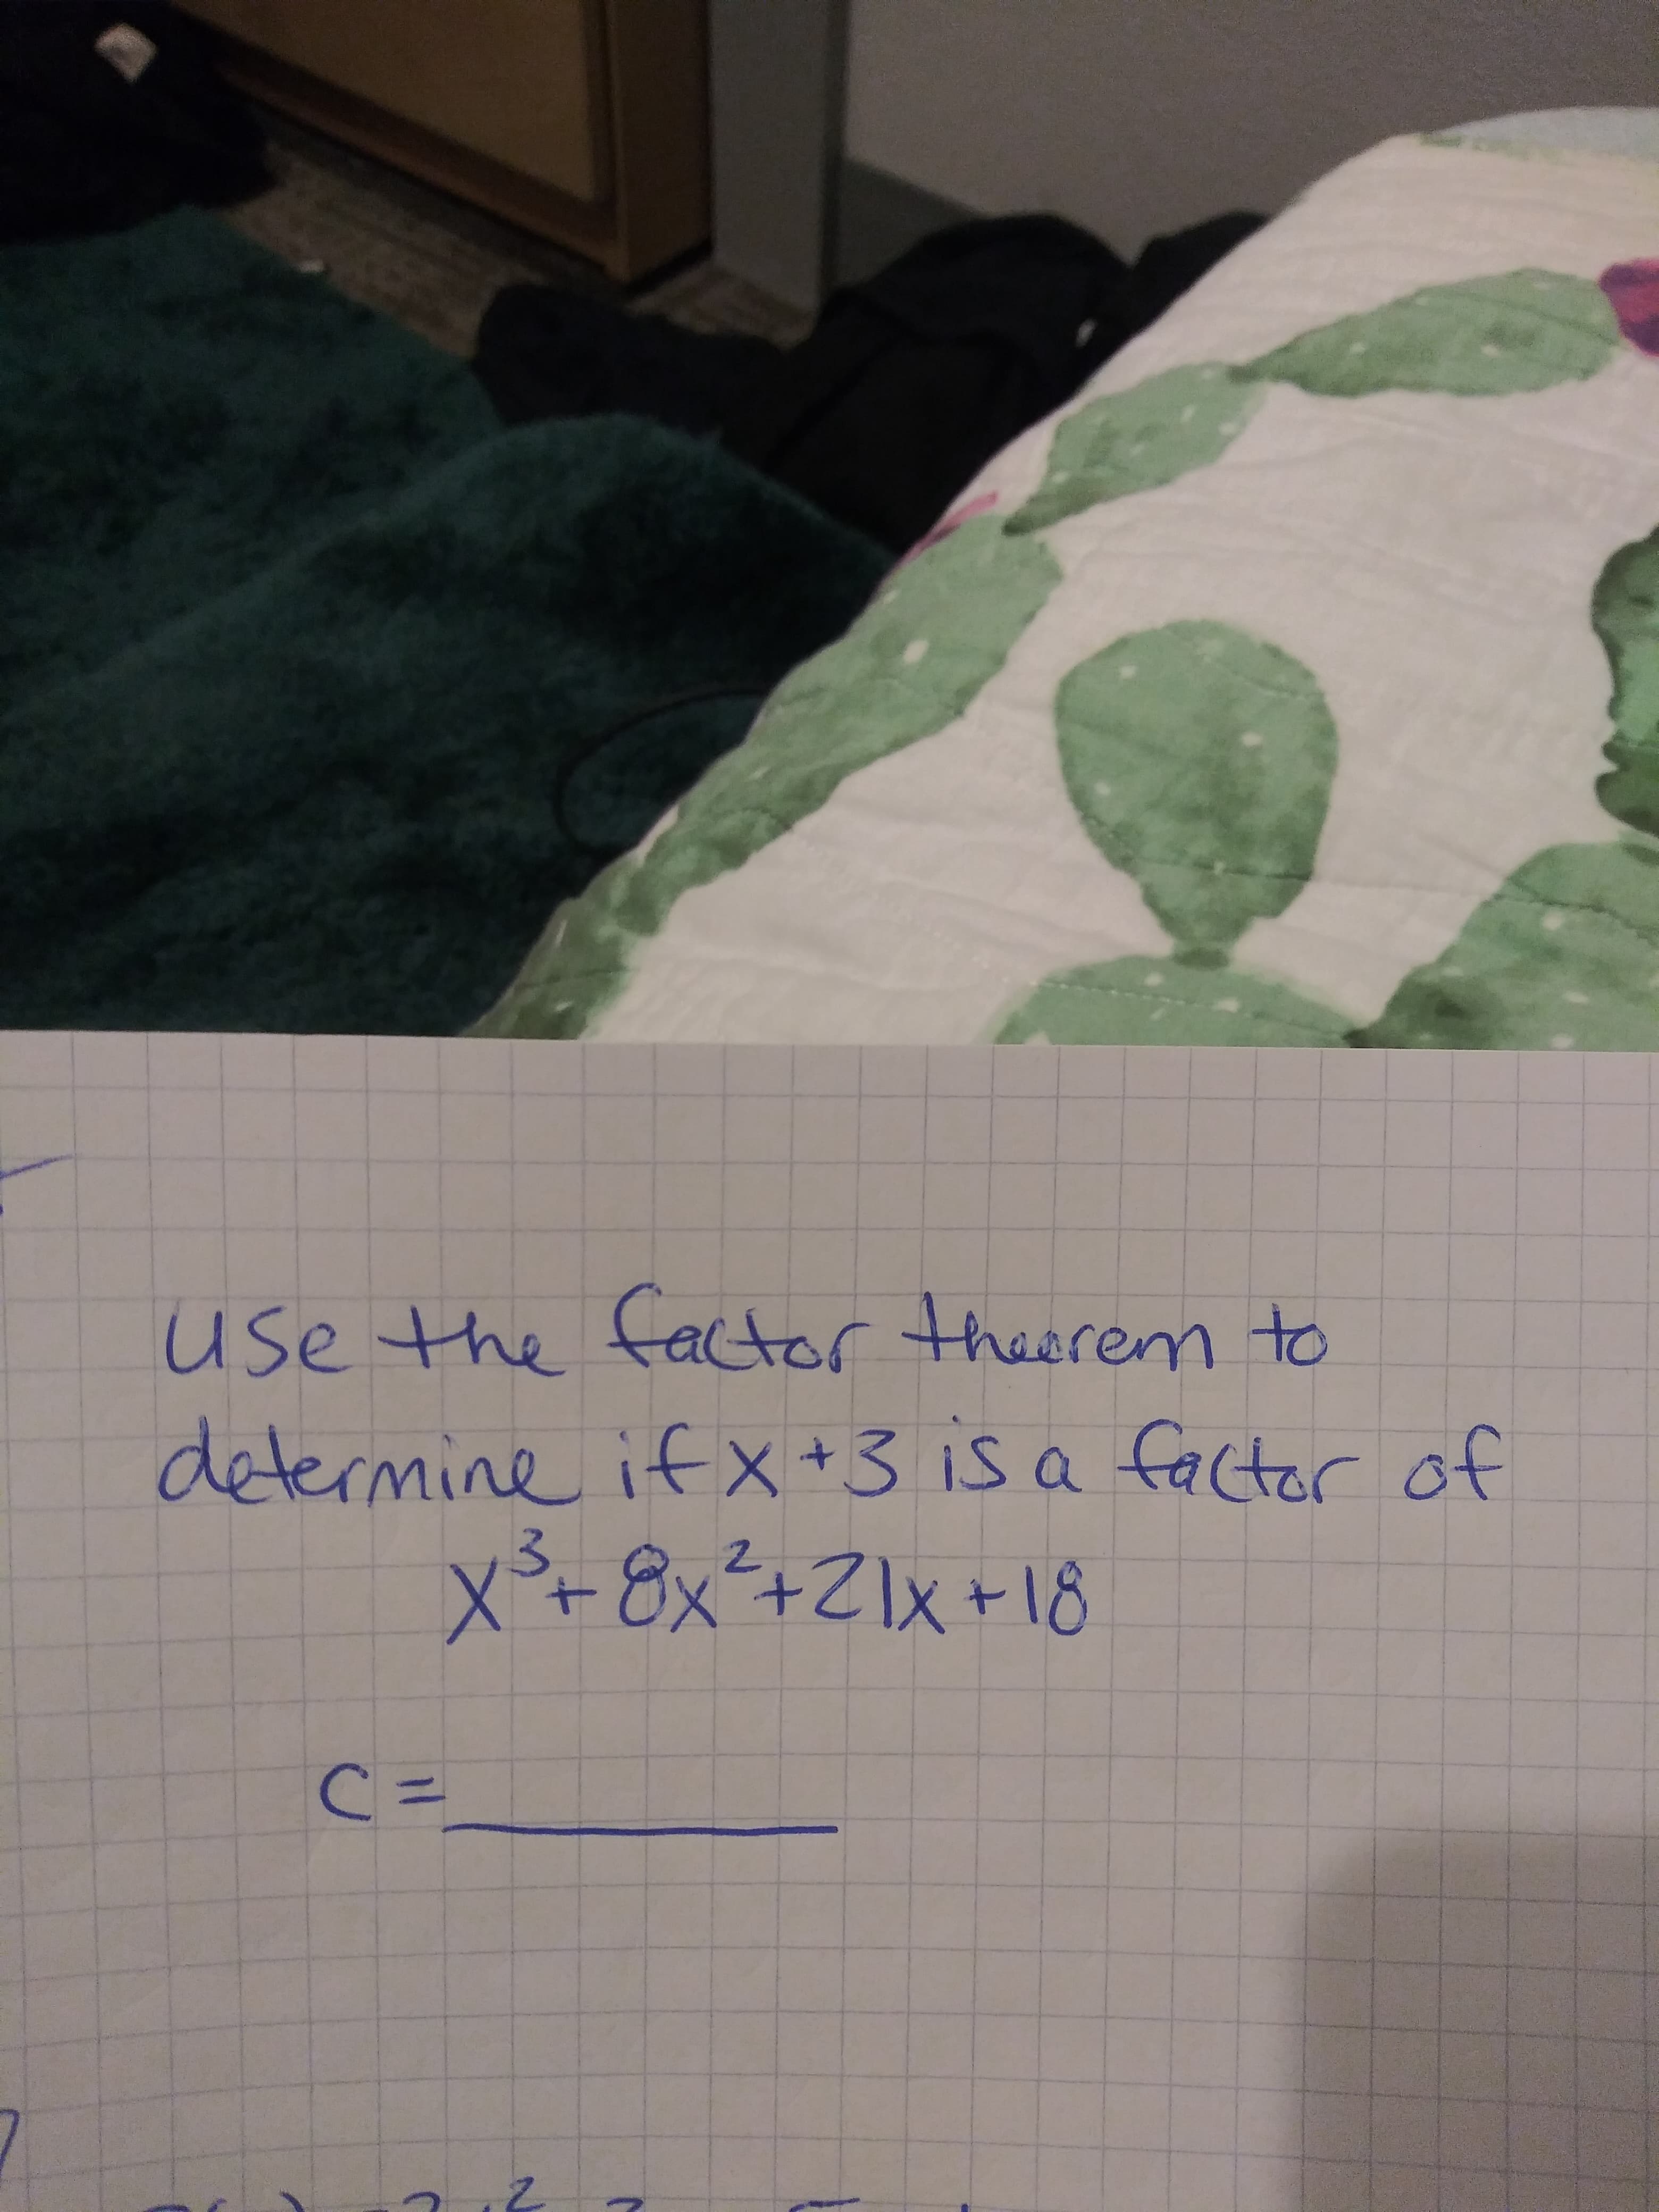 use the fator theerem to
determine if X+3 is a
x³-8x²+ZIx+18
factor of
3.
C.
=
